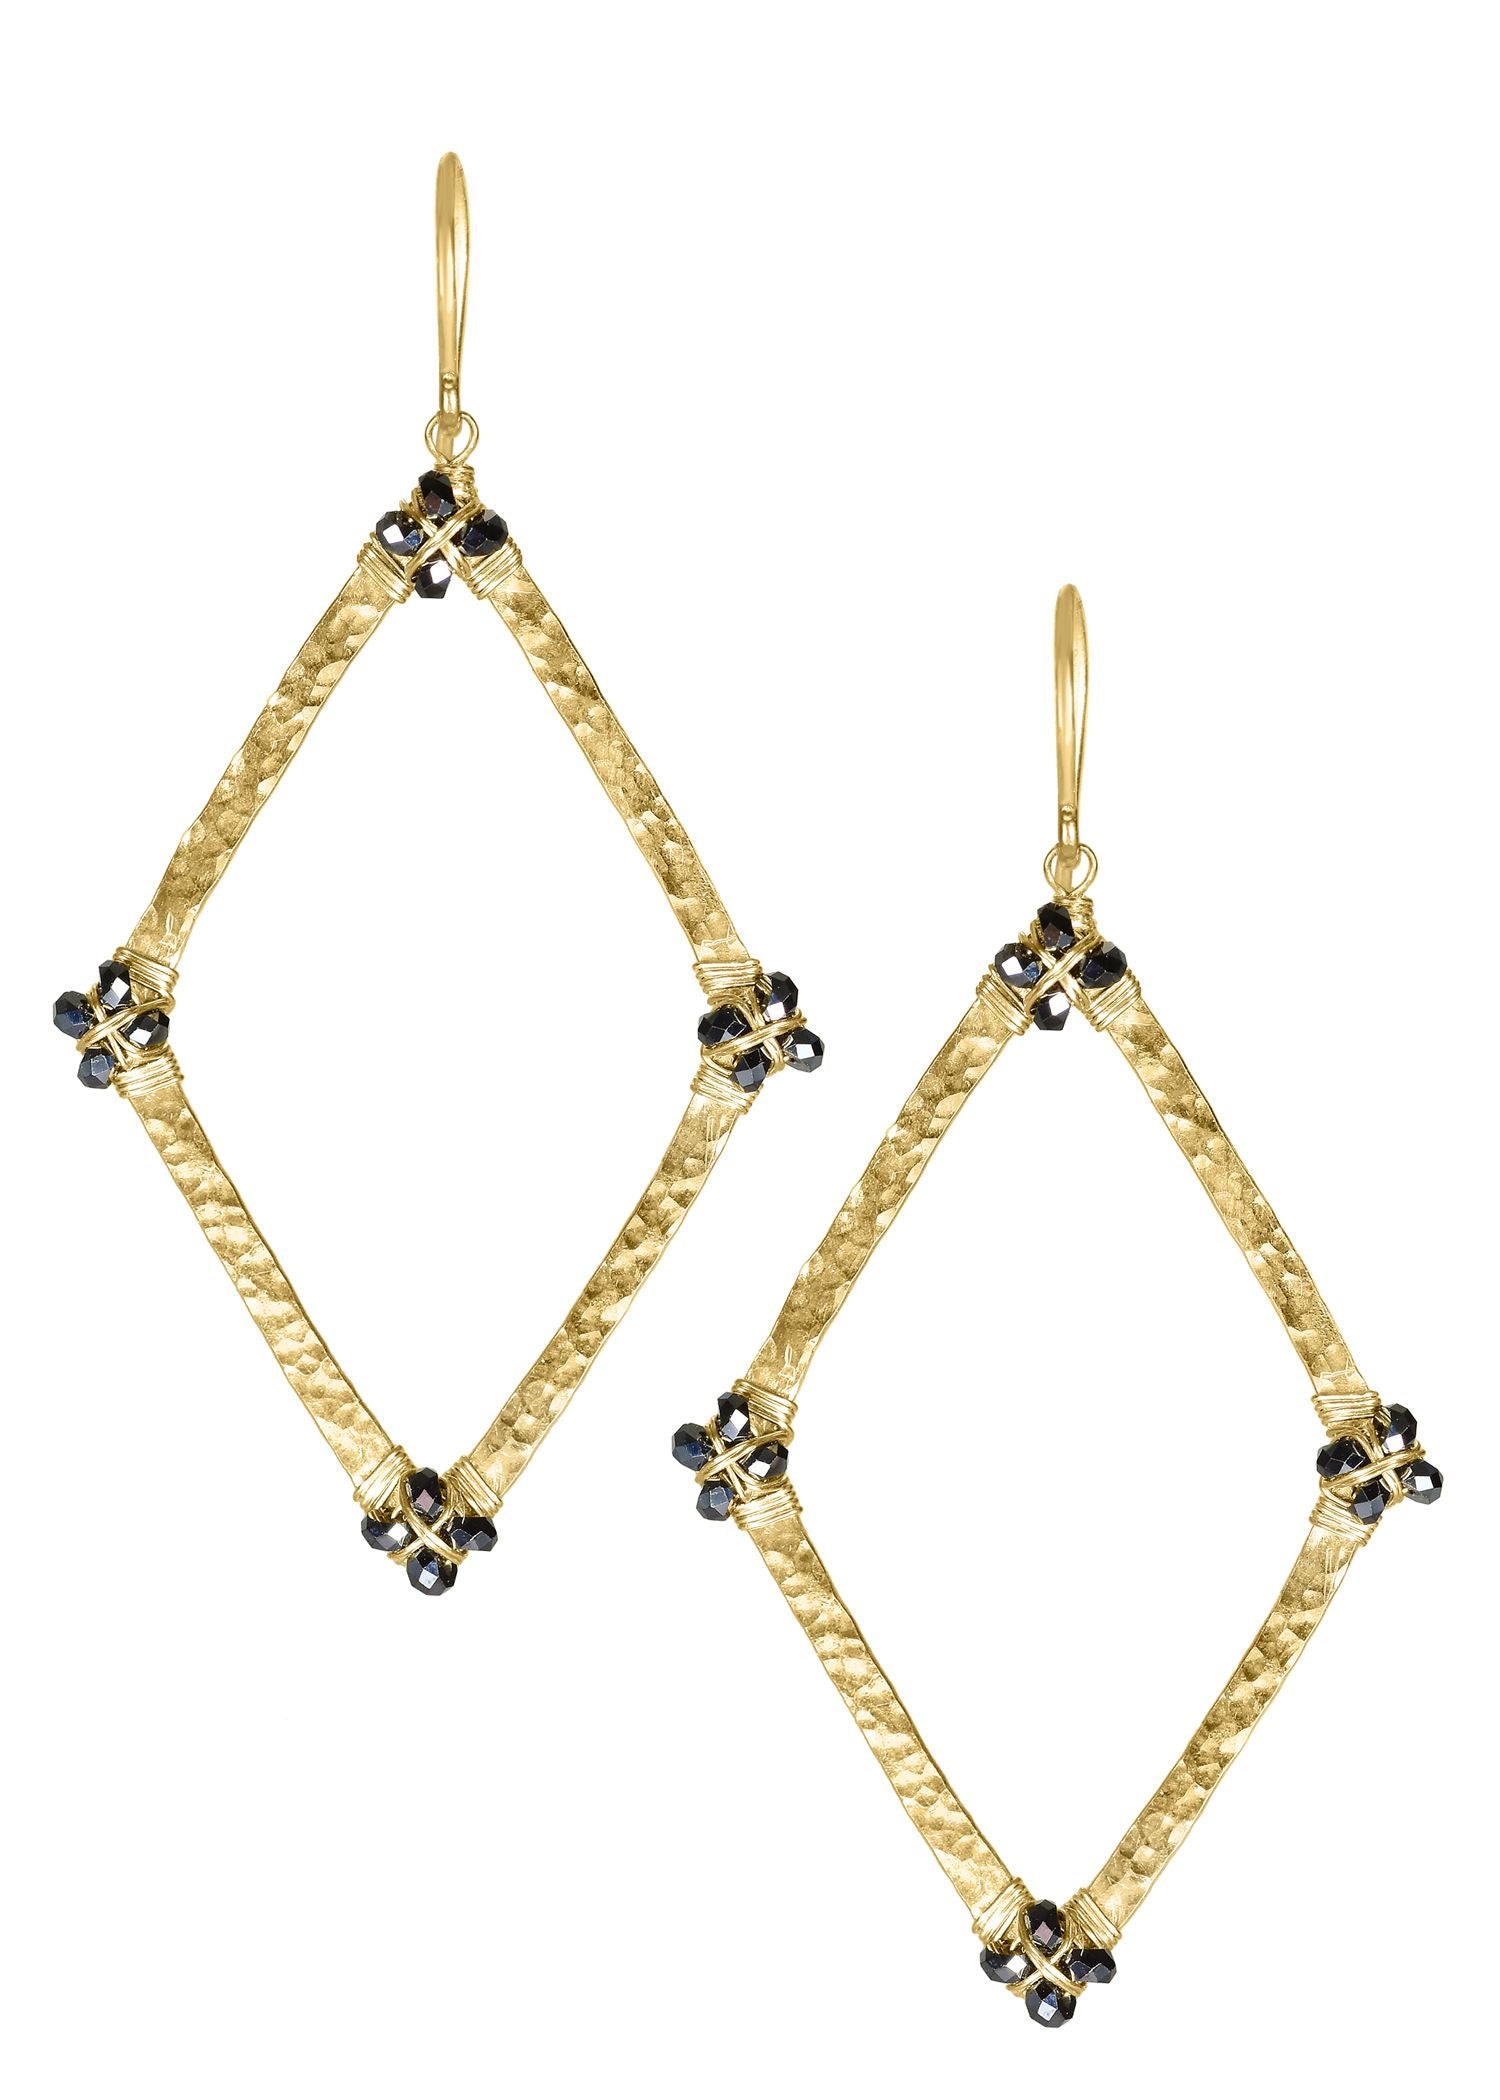 Black spinel 14k gold fill Earrings measure 2" in length (including the ear wires) and 1" in width Handmade in our Los Angeles studio